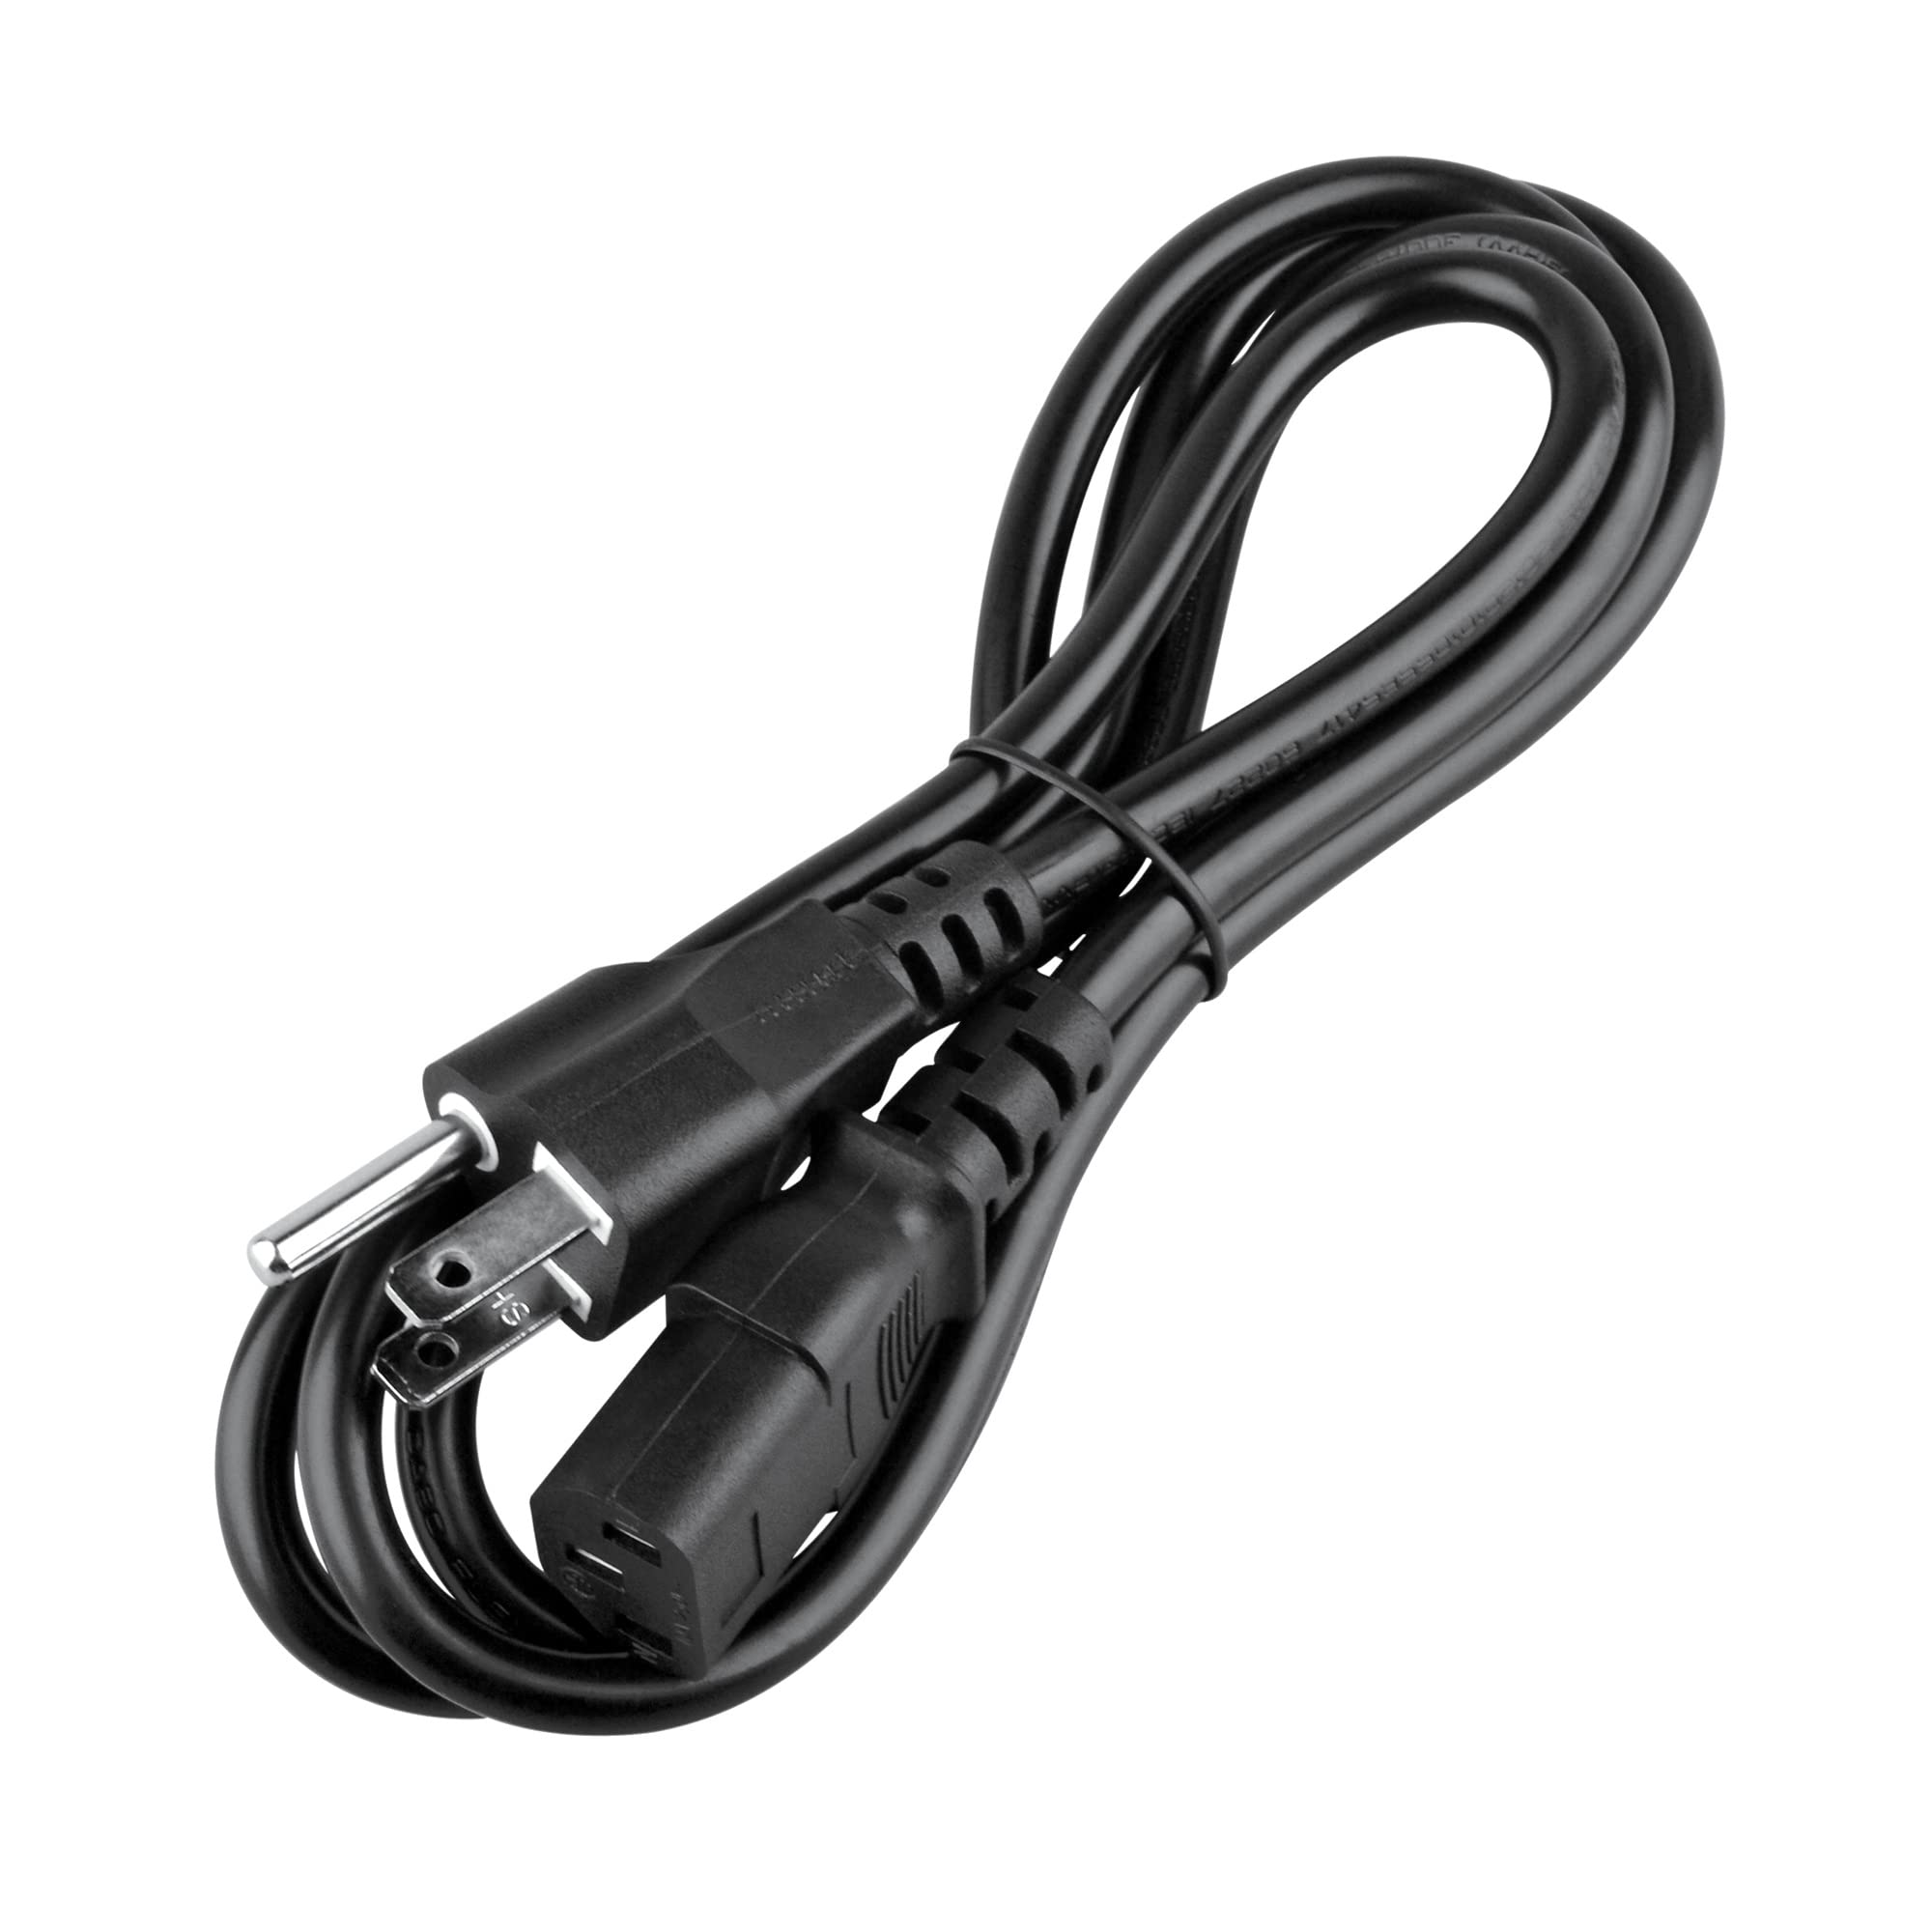 kybate 5ft AC Power Cord Cable Lead for Zojirushi NP-GBC05 5.5-Cup Micom Rice Cooker